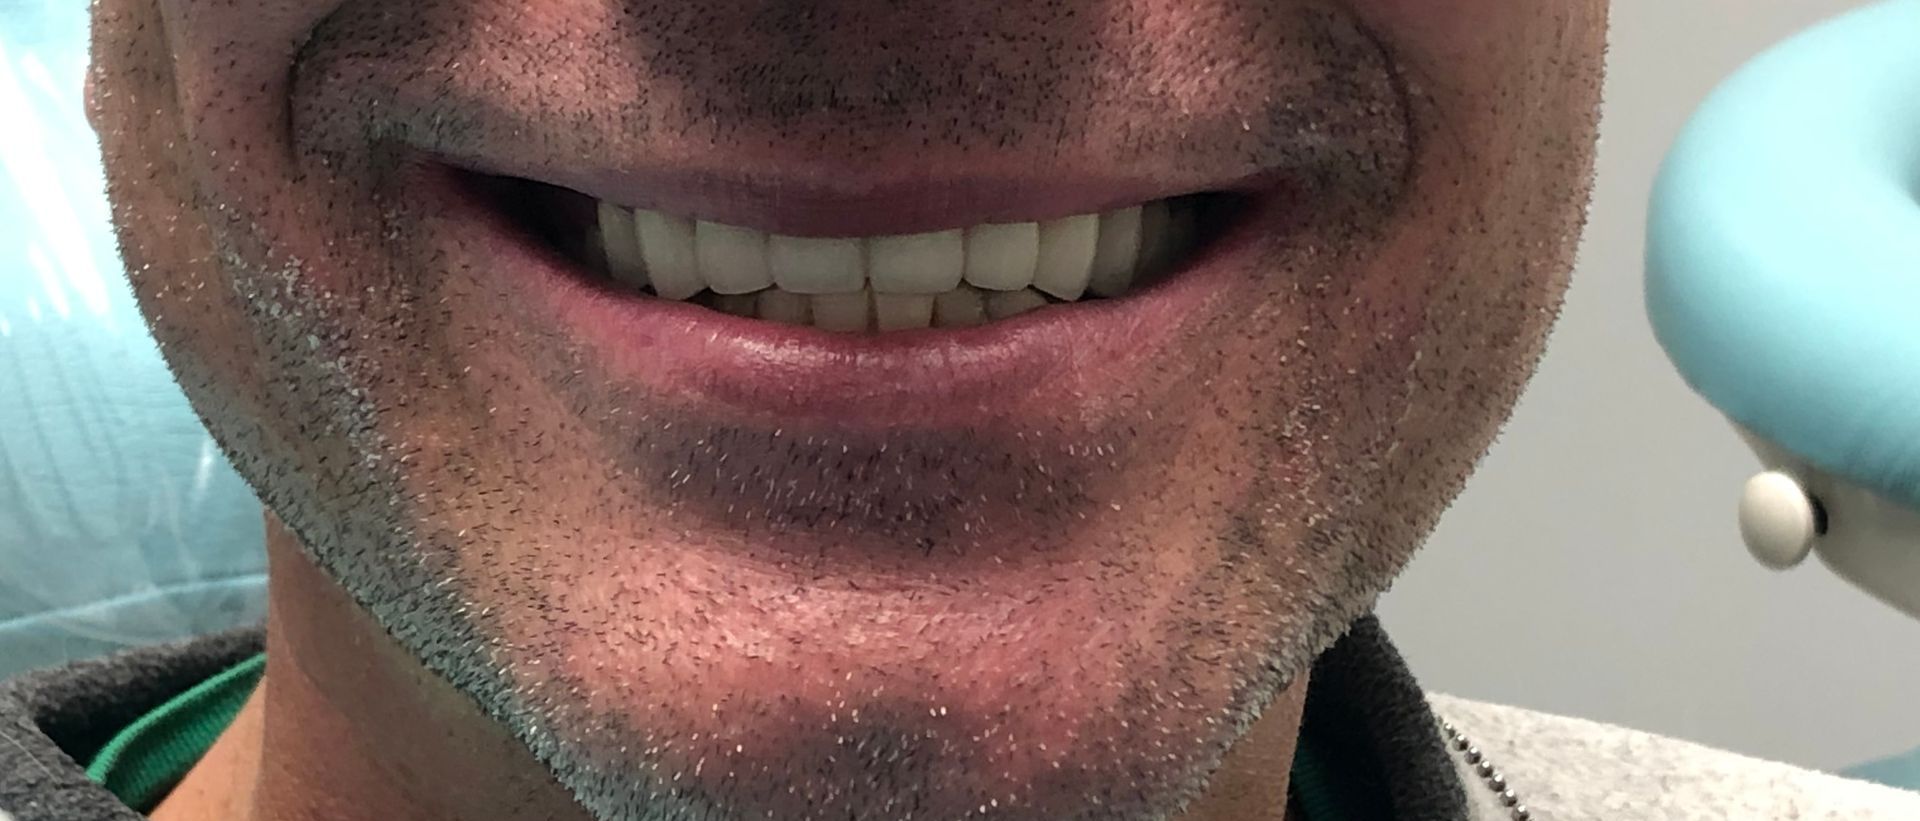 a close up of a man 's face with a smile on his face | Full mouth dental crowns | Full mouth restoration | Smile Makeover | Before and After Dental Treatment | Barclay Family Dental | Best Dentist For Family Dentistry, Dental Implants, and Cosmetic Dentistry in Cherry Hill, NJ